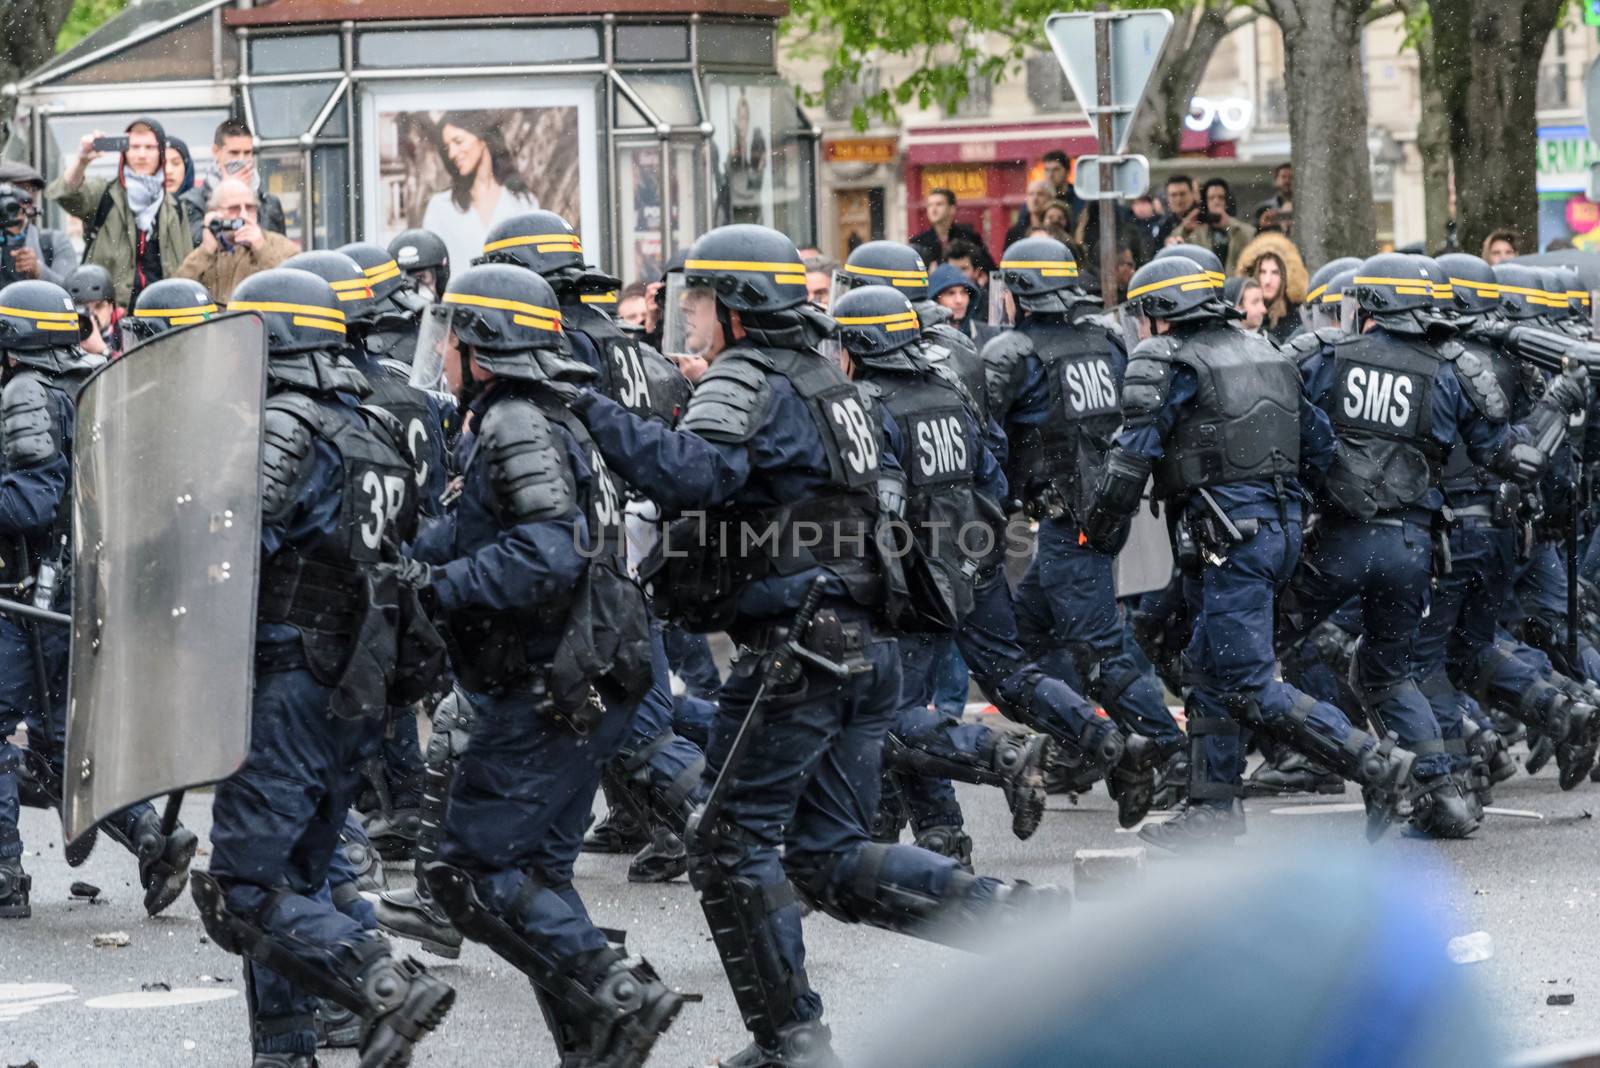 FRANCE, Paris: Riot policemen rush toward the crowd during a protest on April 9, 2016 in Paris, against the French government's proposed labour law reforms.